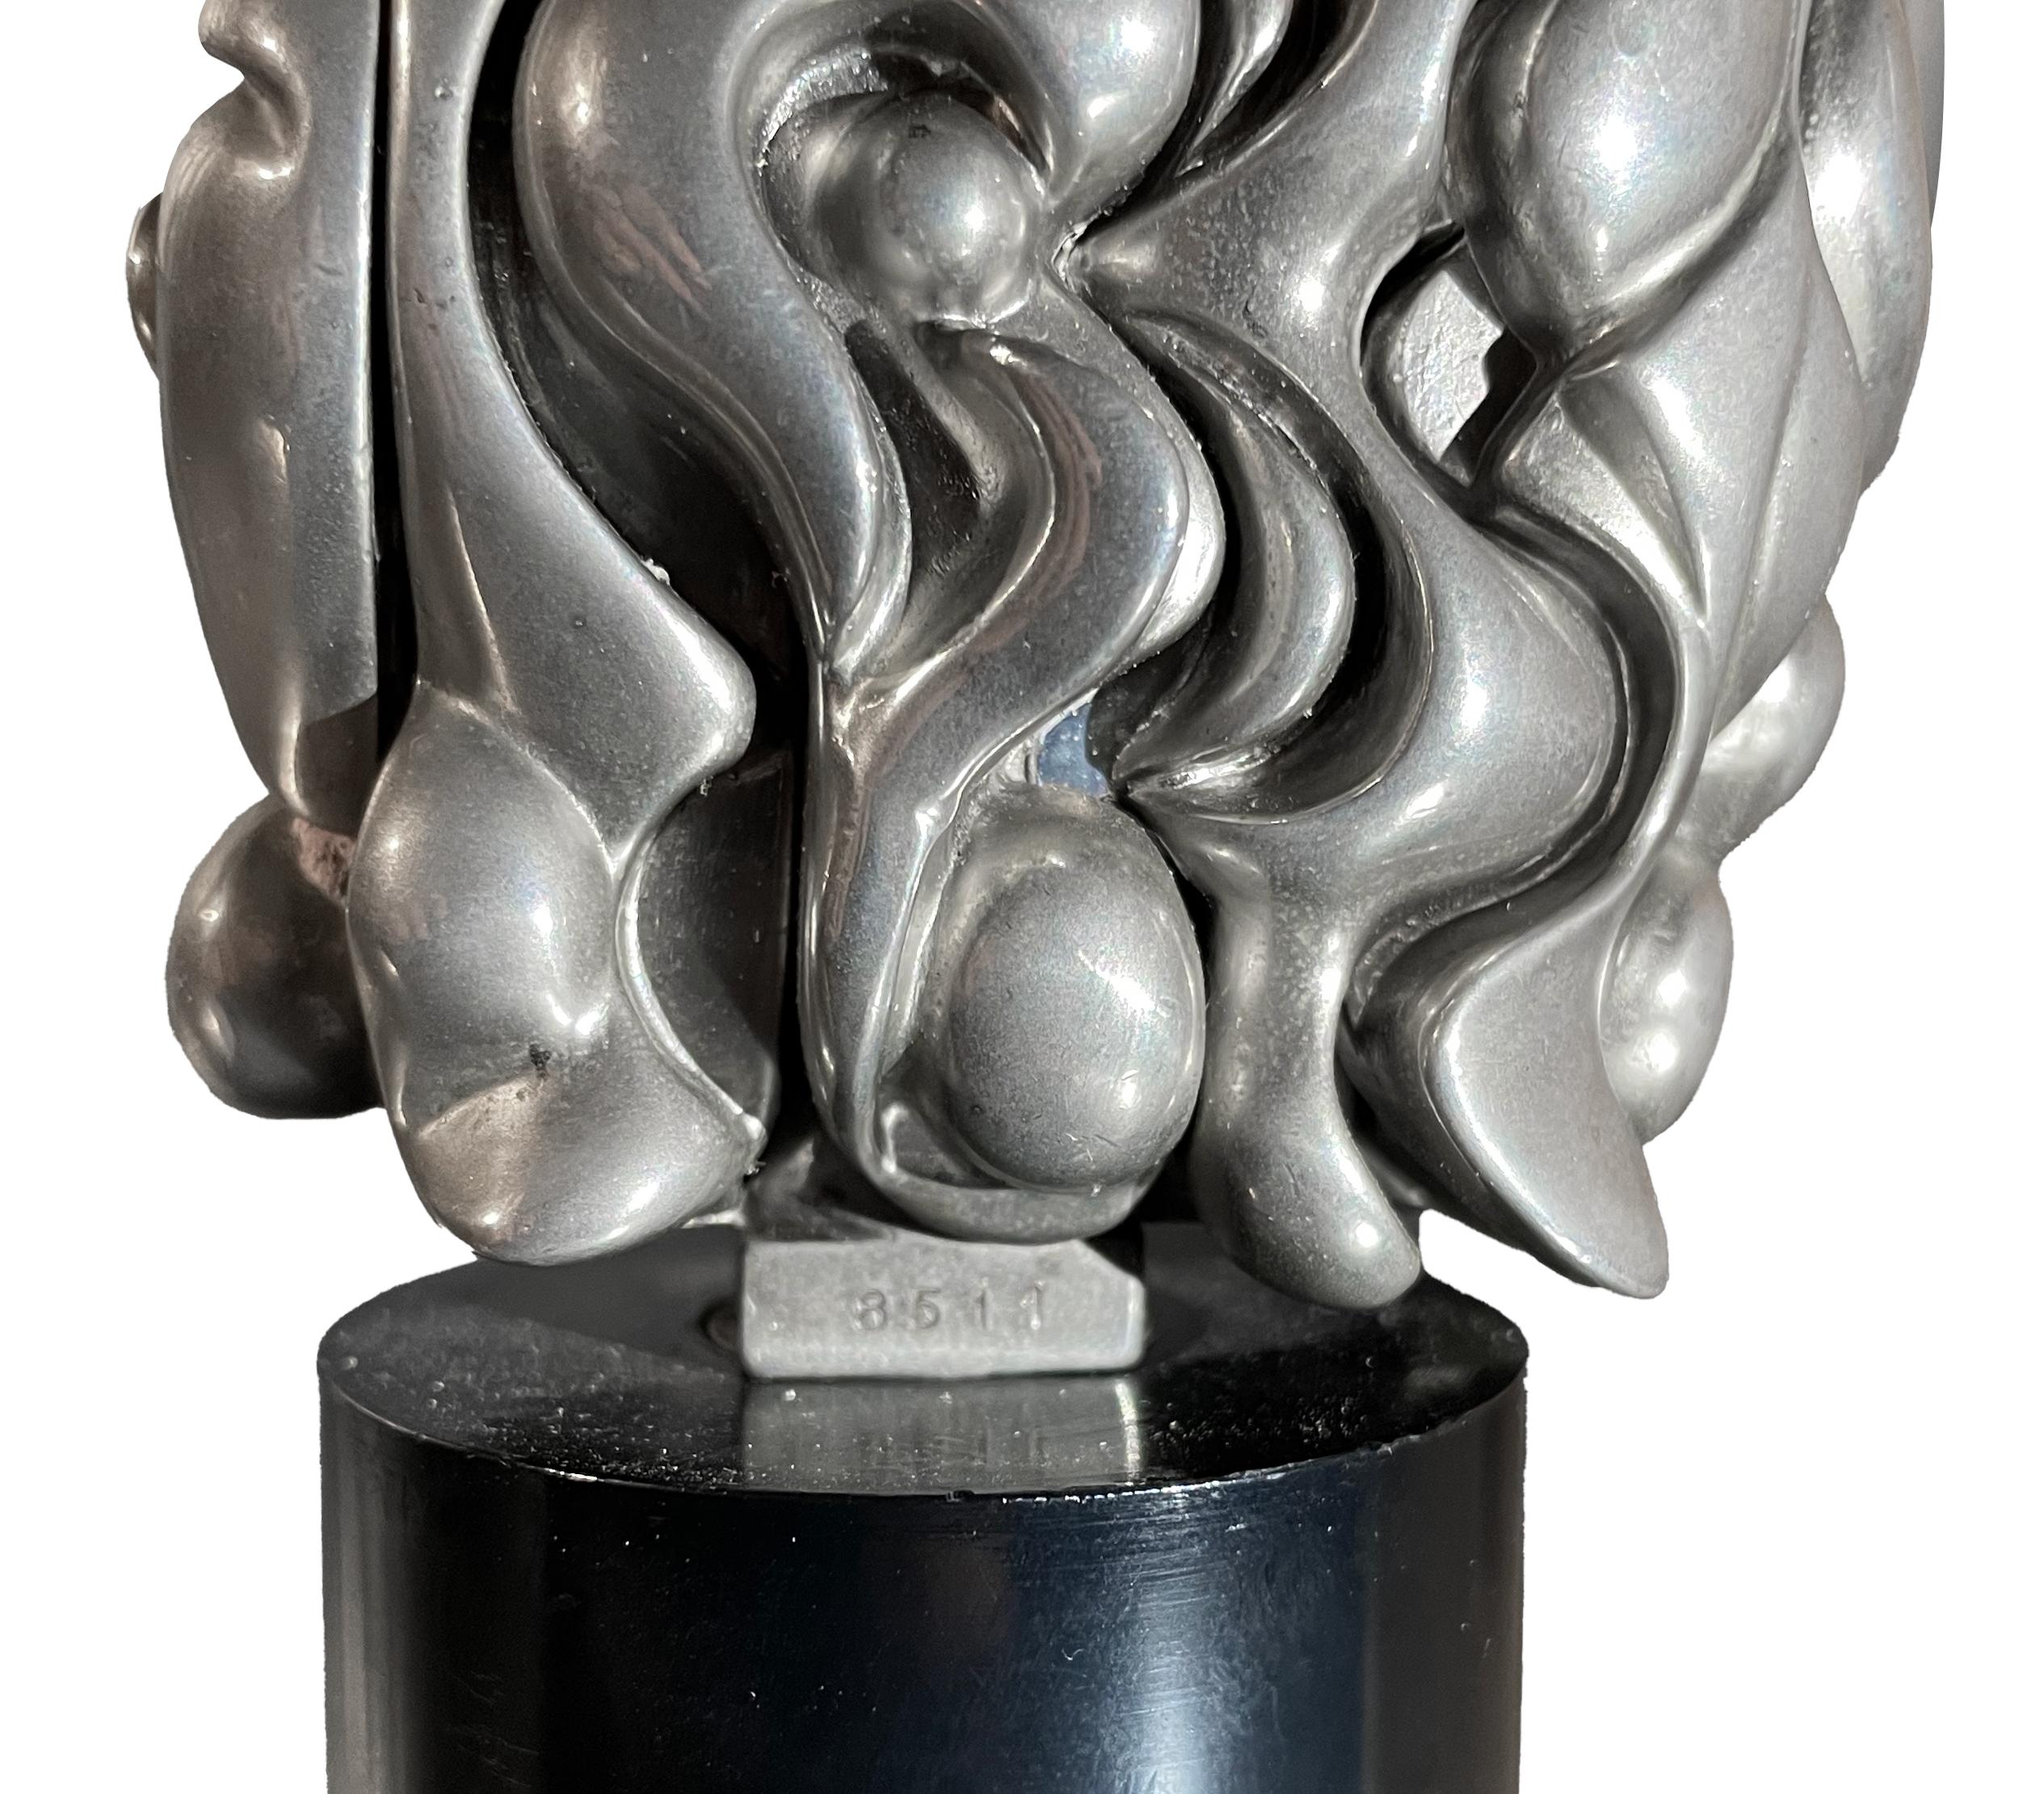 Portrait of Michele - Nickel Plated Sculpture by M. Berrocal - 1969 2